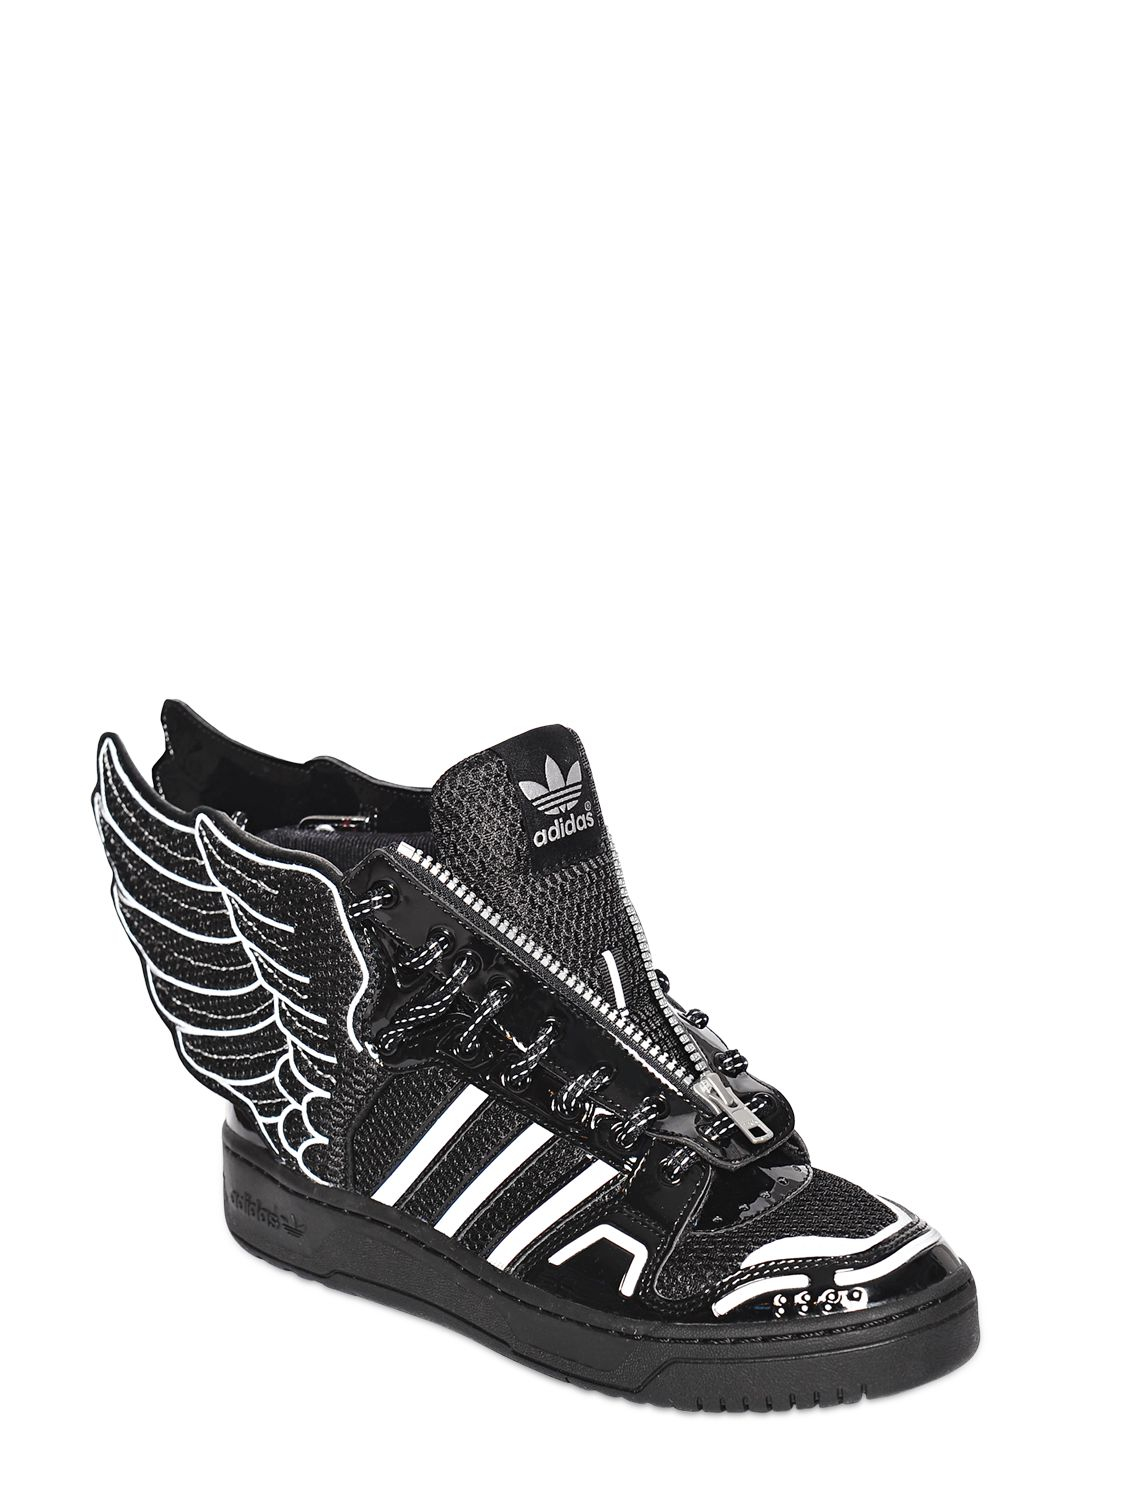 adidas high tops with wings